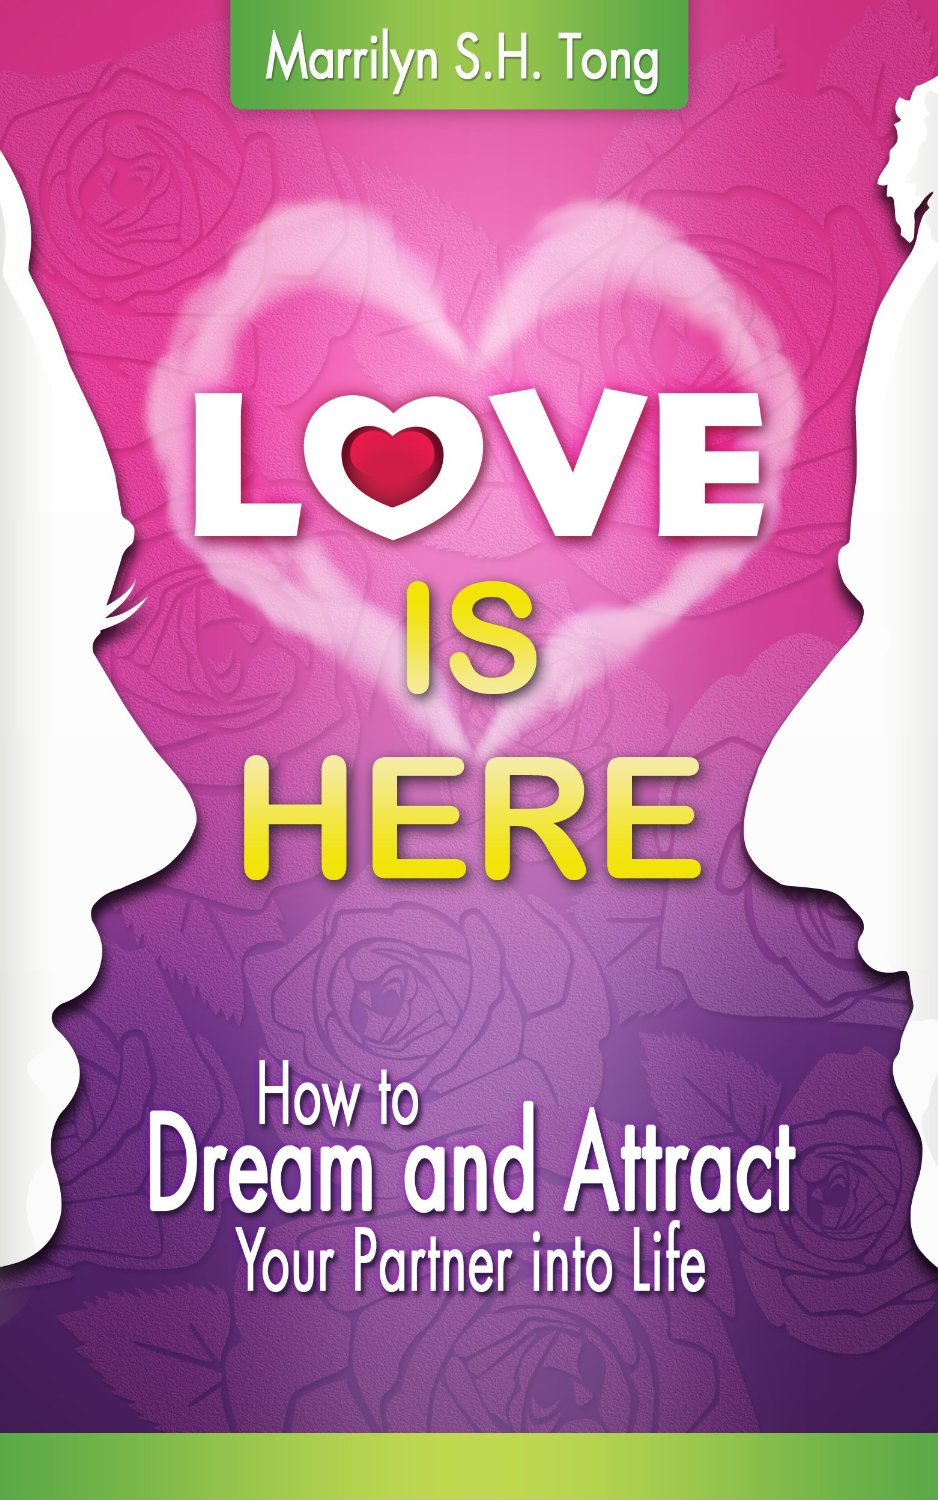 Love Is Here: How to Dream and Attract Your Partner into Life by Marrilyn S.H. Tong